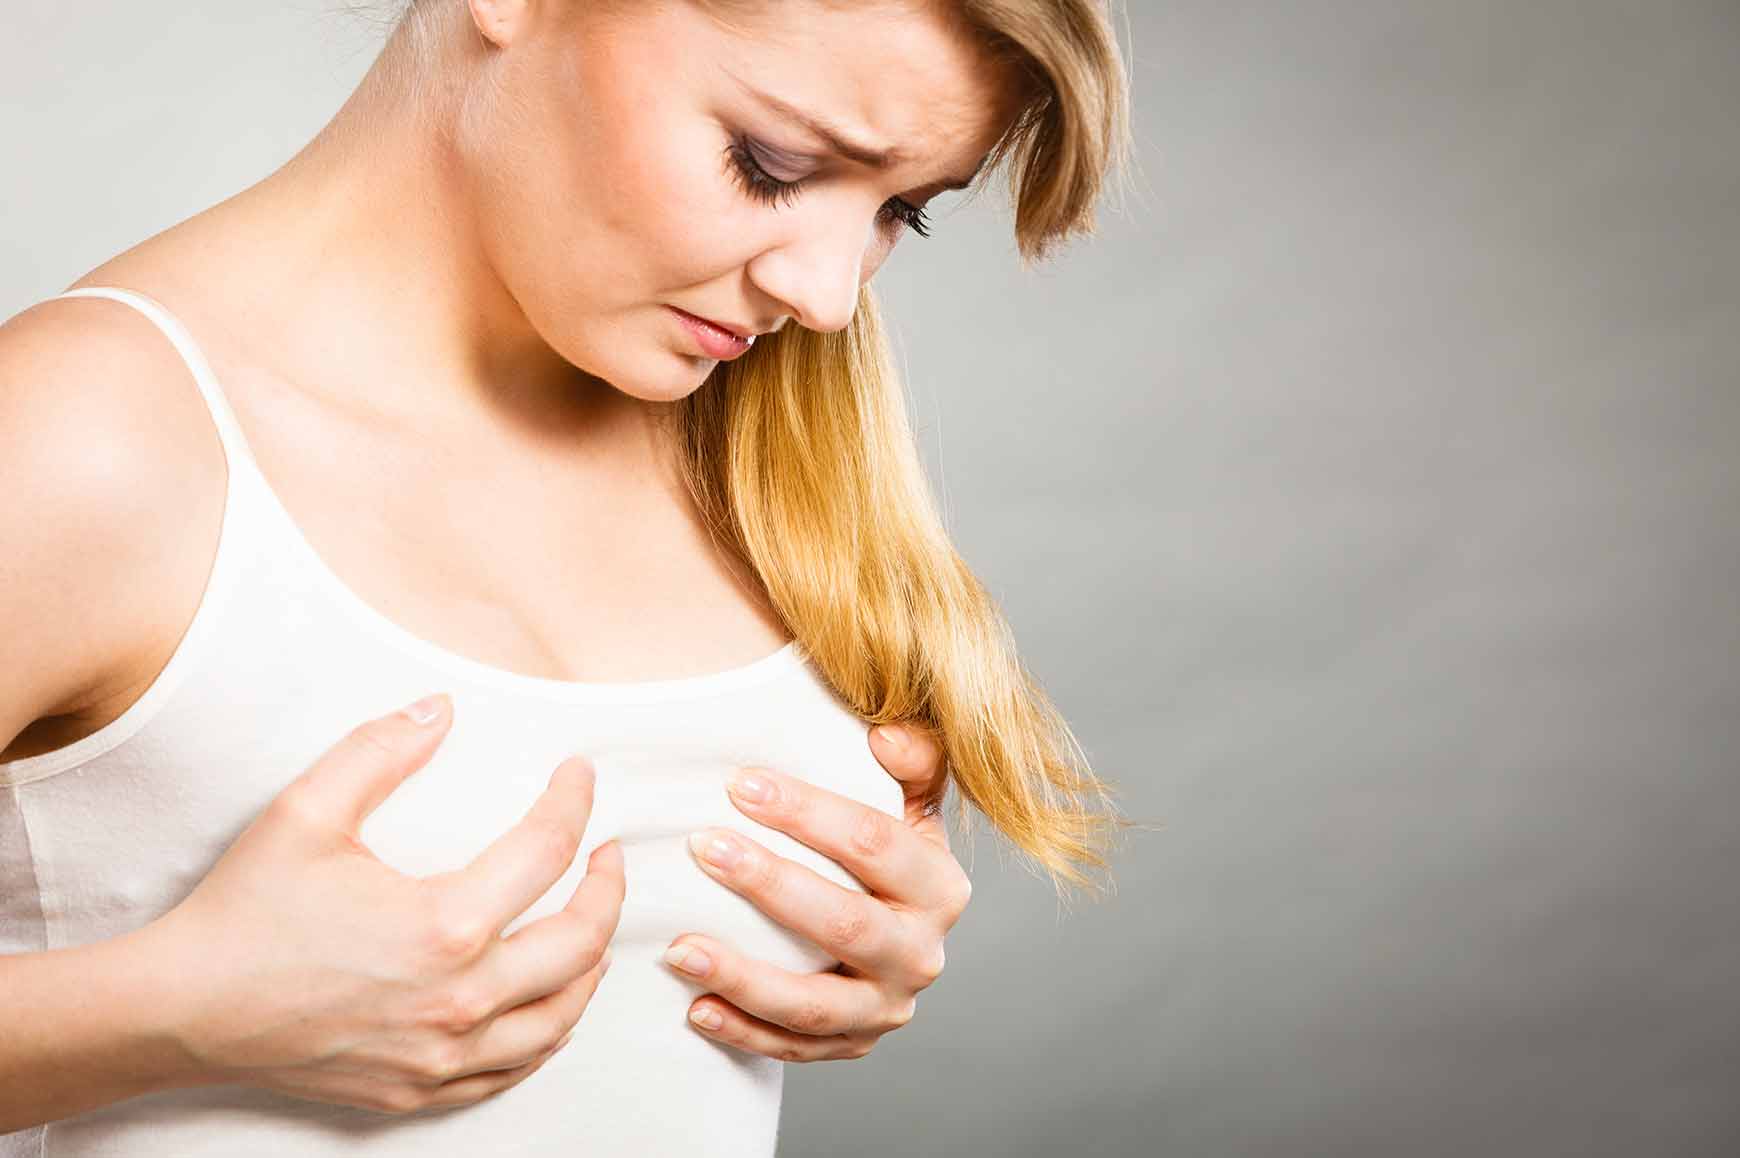 If you suspect you have Breast Implant Illness, it is advisable to seek medical advice. Dr. Melissa Marks is here to help.